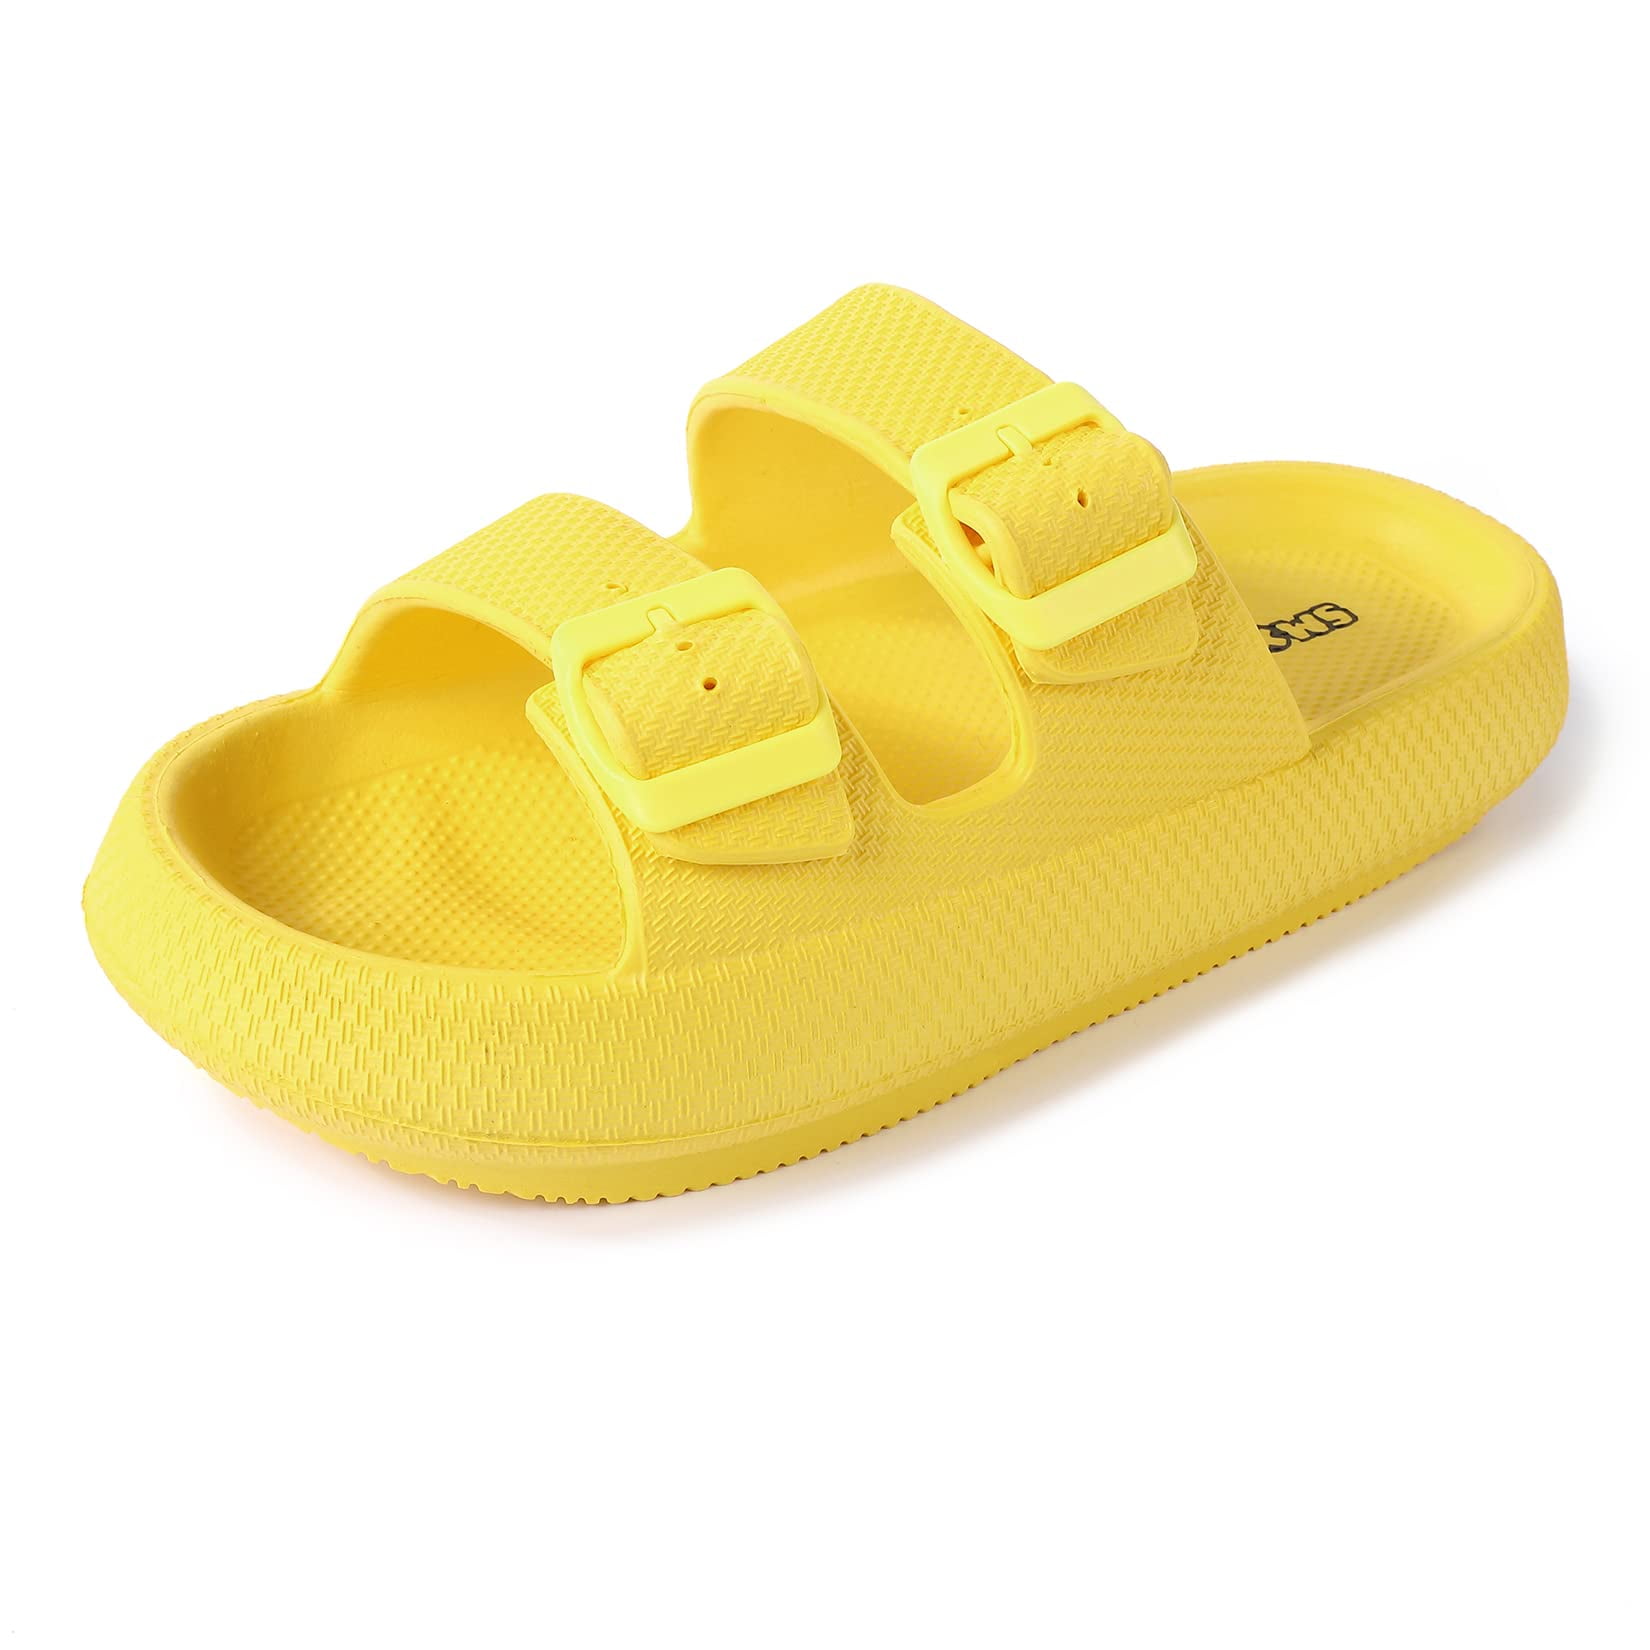  Pillow Slide Sandals for Women Men Ultra Comfort Cloud Sandals  Recovery Rubber Slippers White 35-36